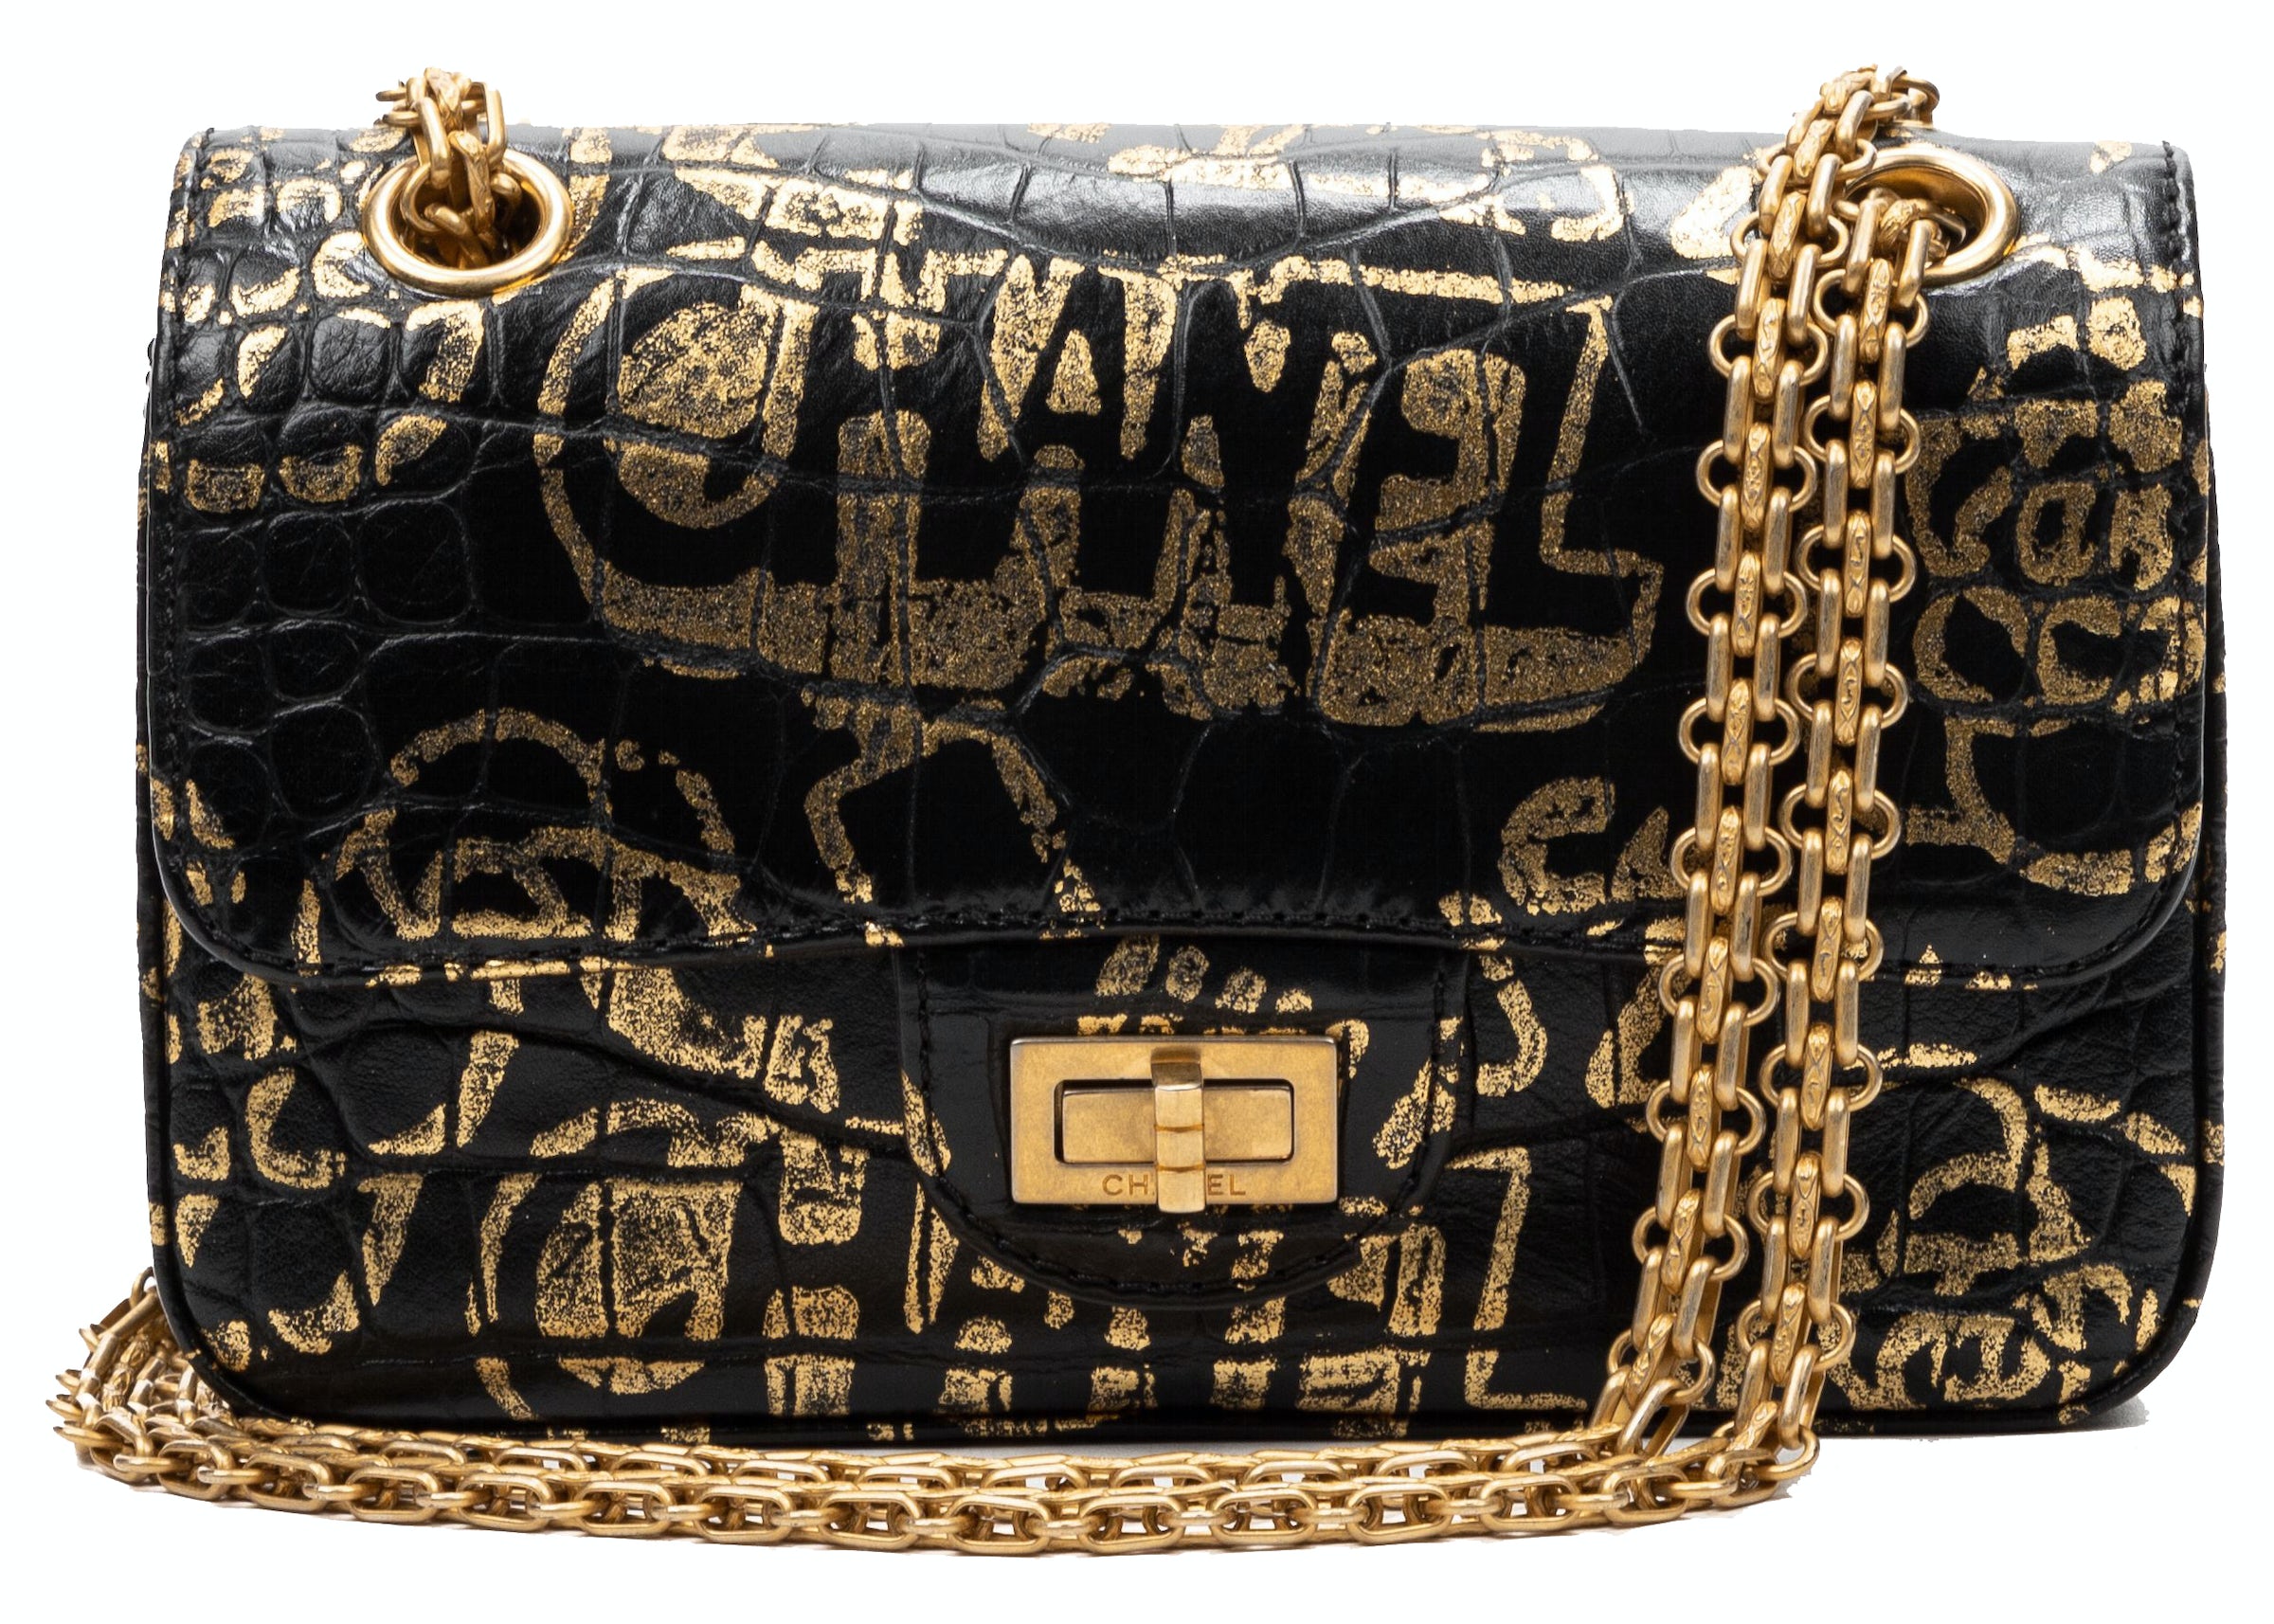 chanel limited edition purse